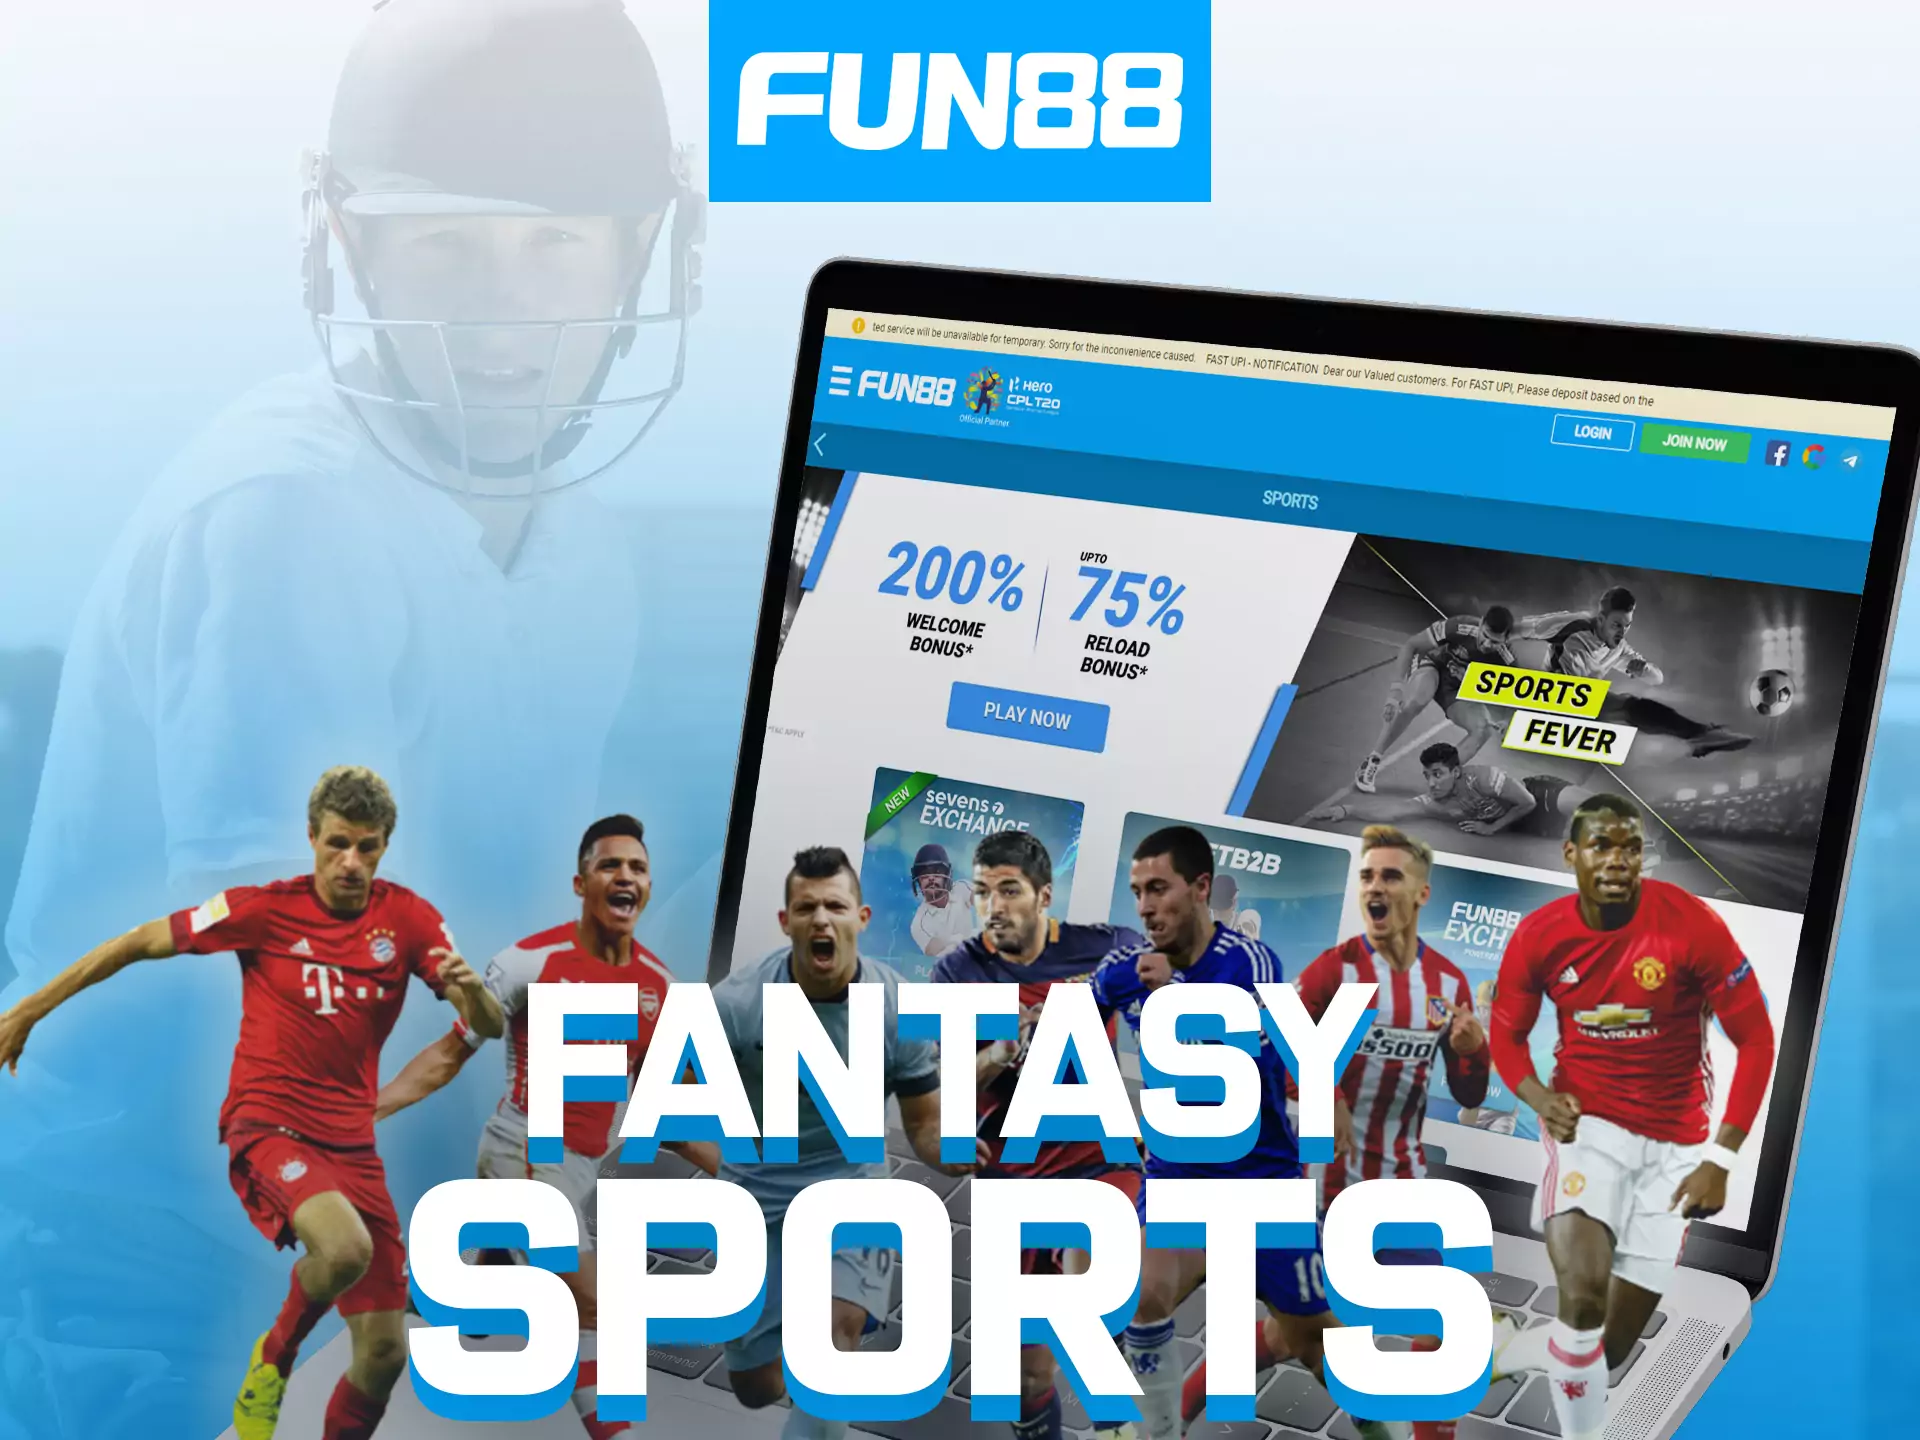 Fun88 you have the opportunity to bet on fantasy sports.